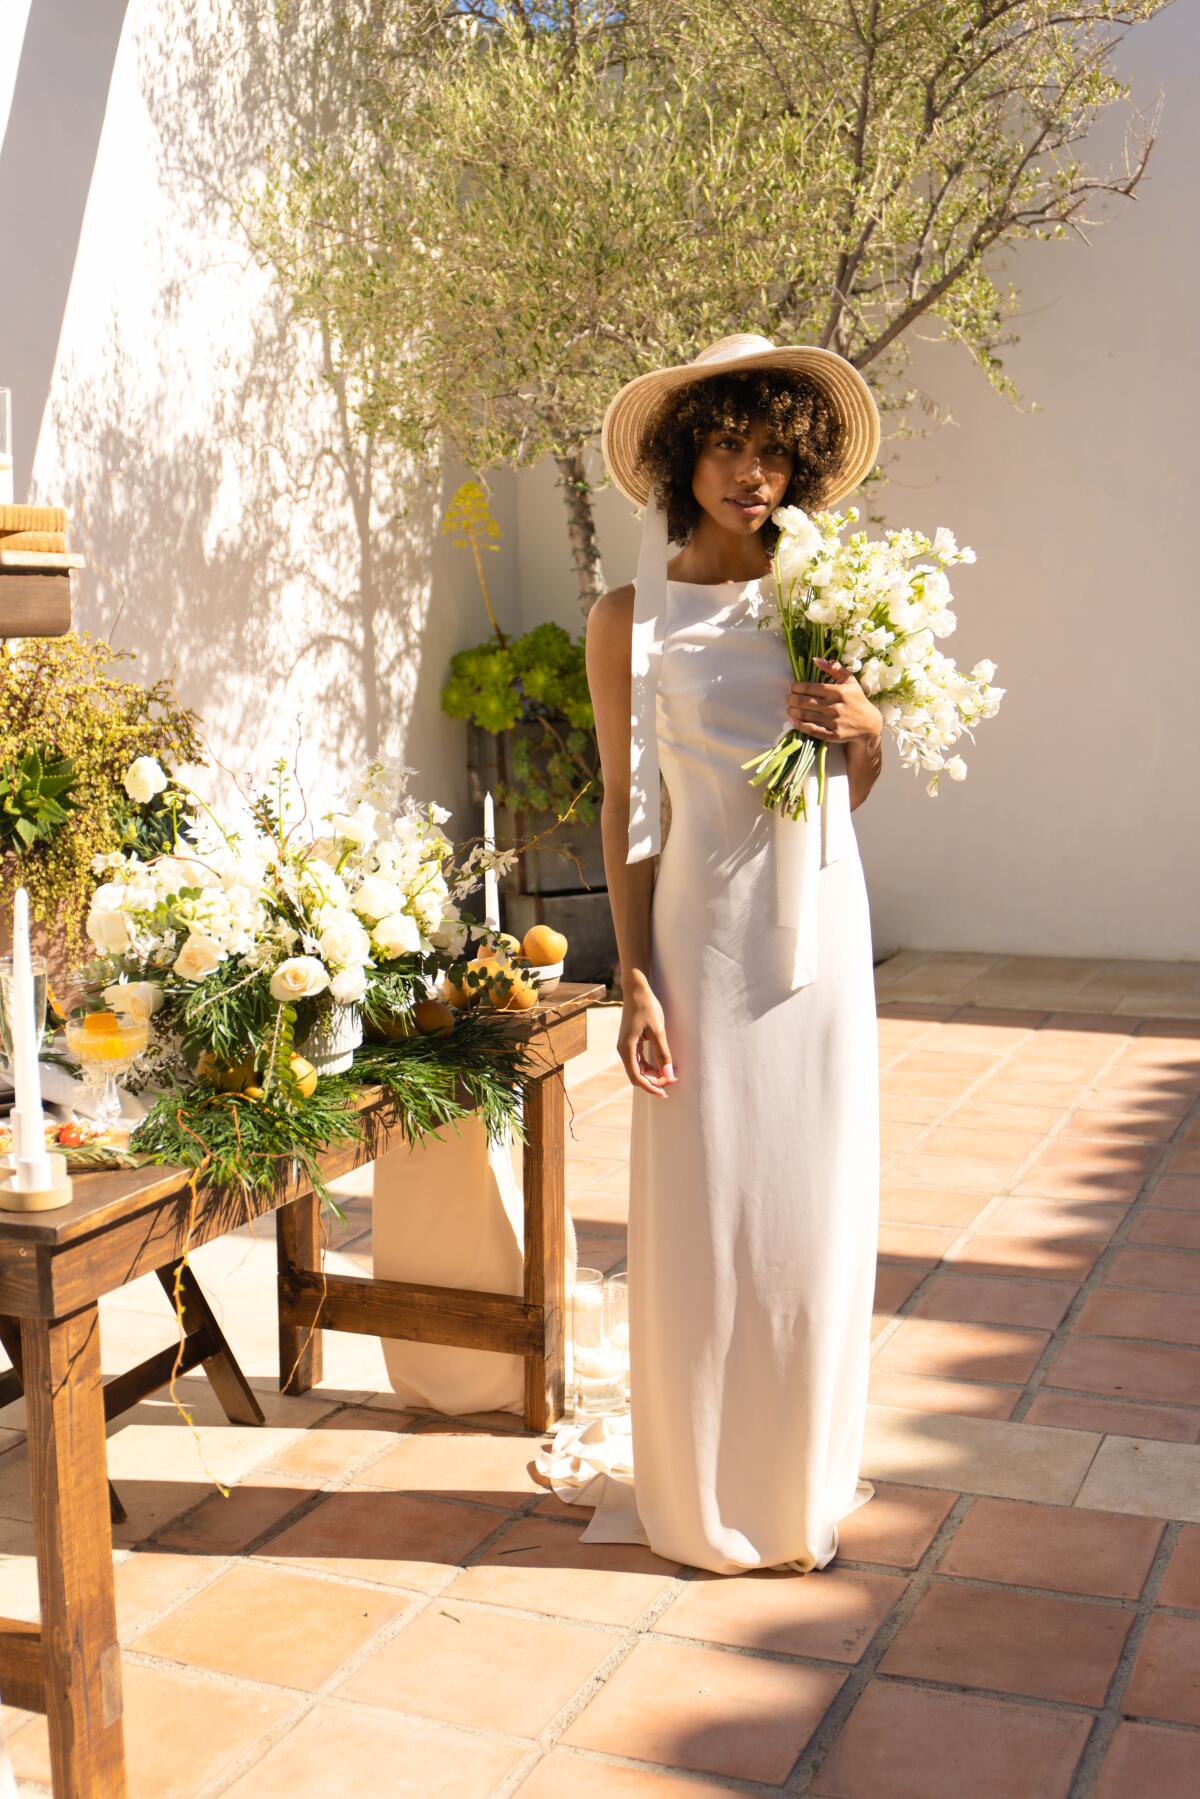 A model stands outside wearing a vintage Valentino cream dress and a hat and holding a large bouquet of flowers.